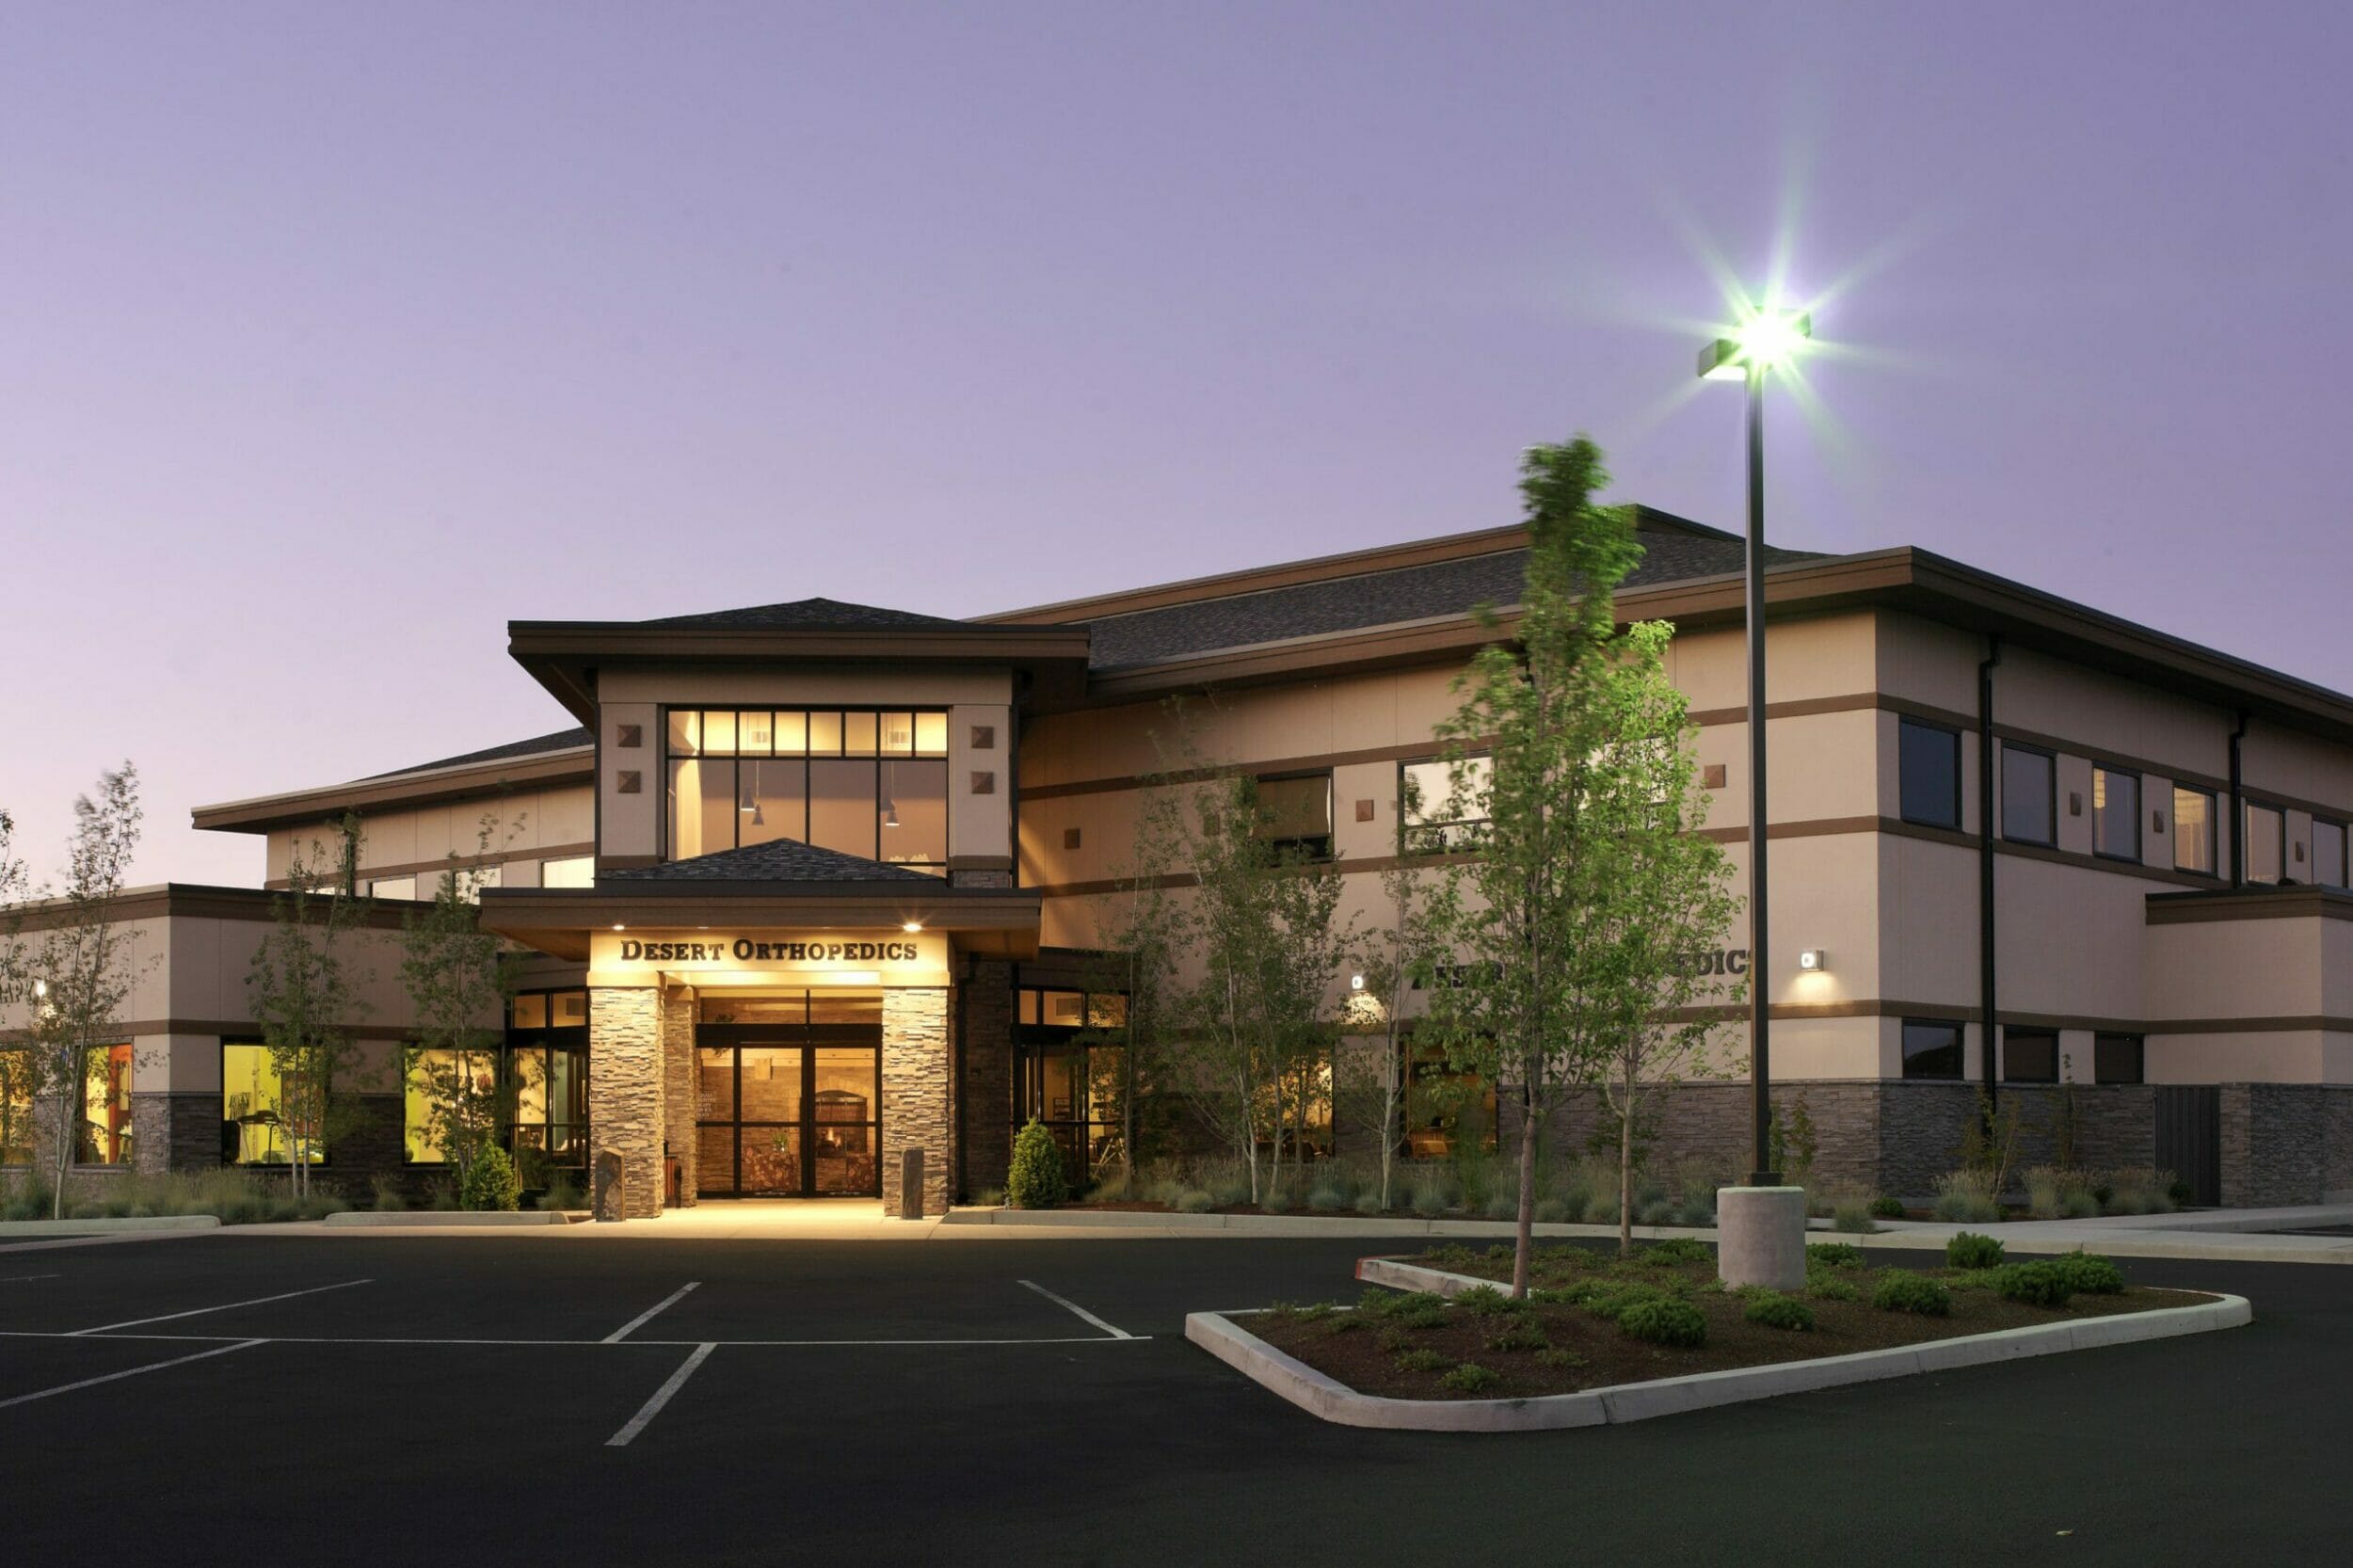 Exterior of Bend Surgery Center at night with accents of stone at the bottom of the building and a tan, stucco exterior